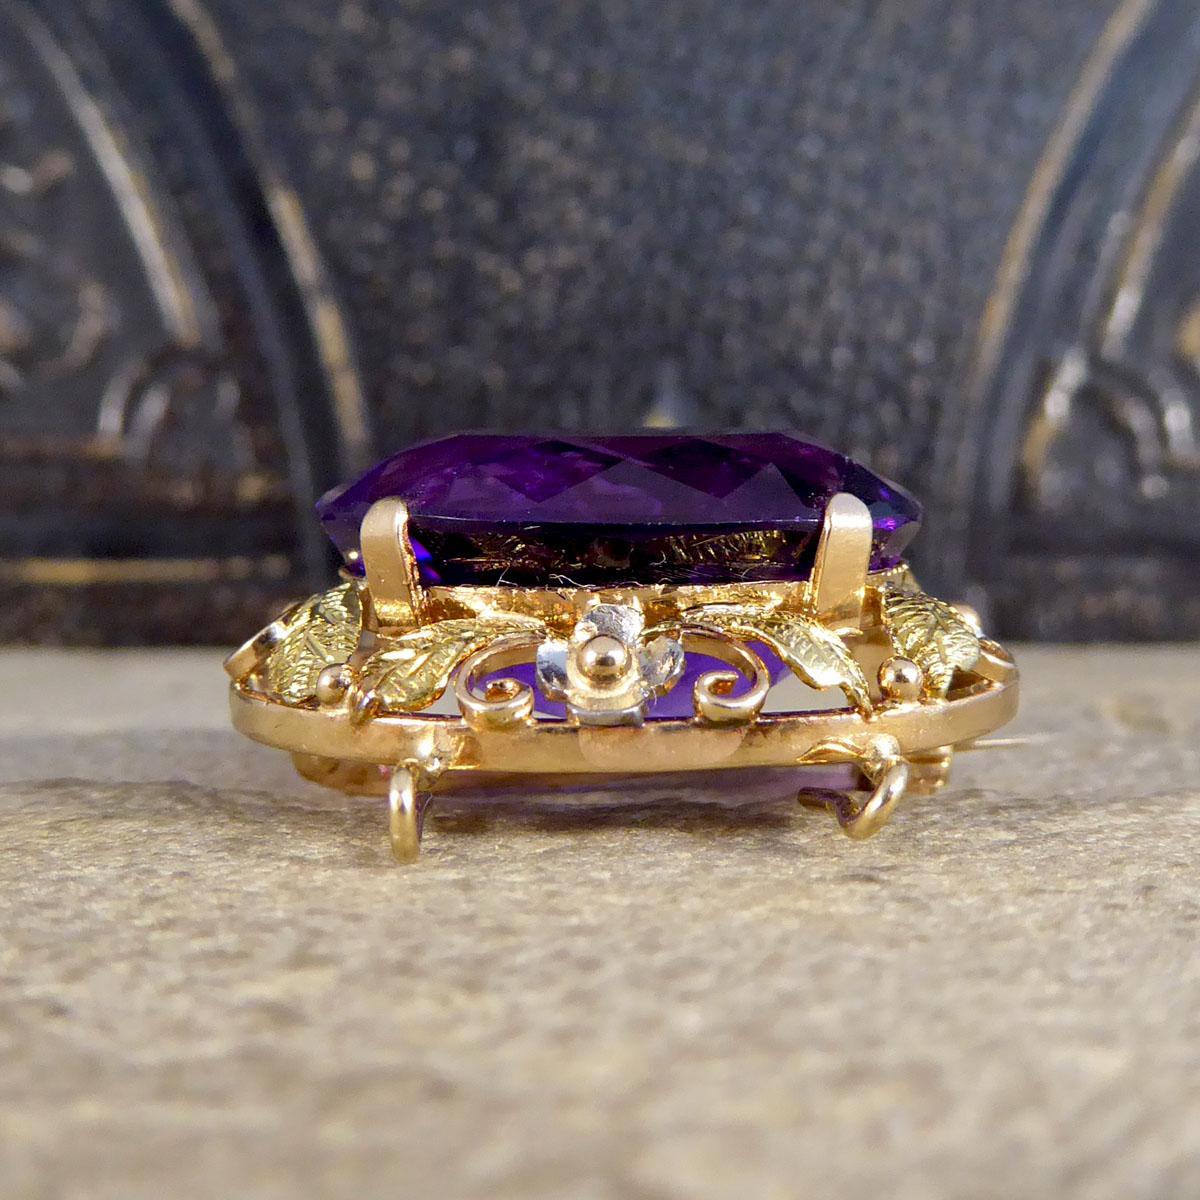 Such a gorgeous vintage brooch and pendant that has been crafted in the 1950's in great condition. It features a beautiful big and vibrant Amethyst gemstone in the centre with a claw setting. The brooch itself has a filigree pattern around the